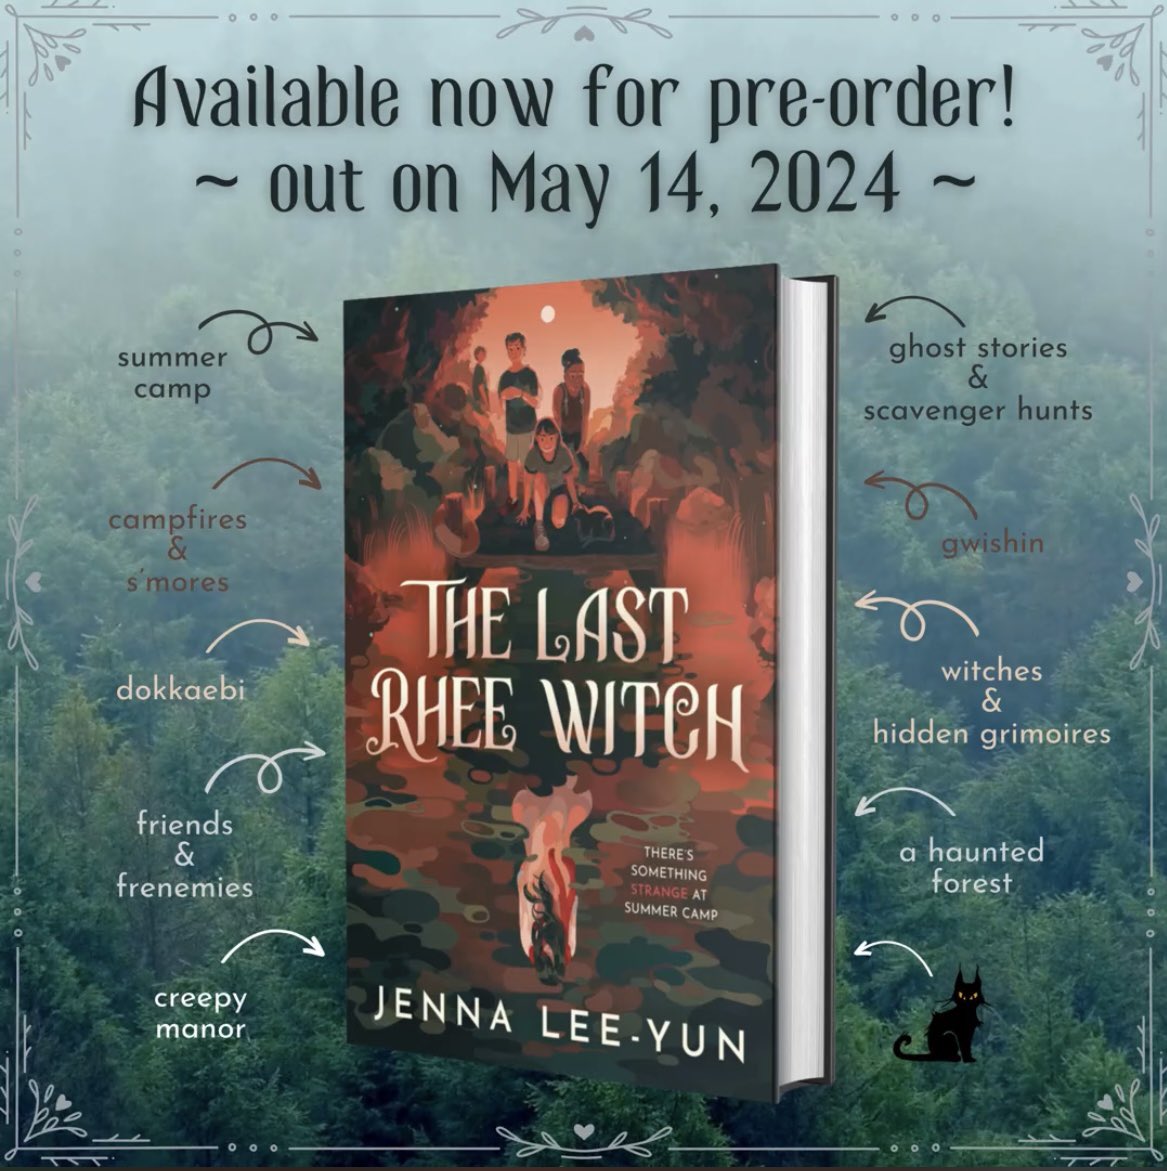 Look at this beautiful cover! #thelastrheewitch by @jennaleeyun is available to pre-order!